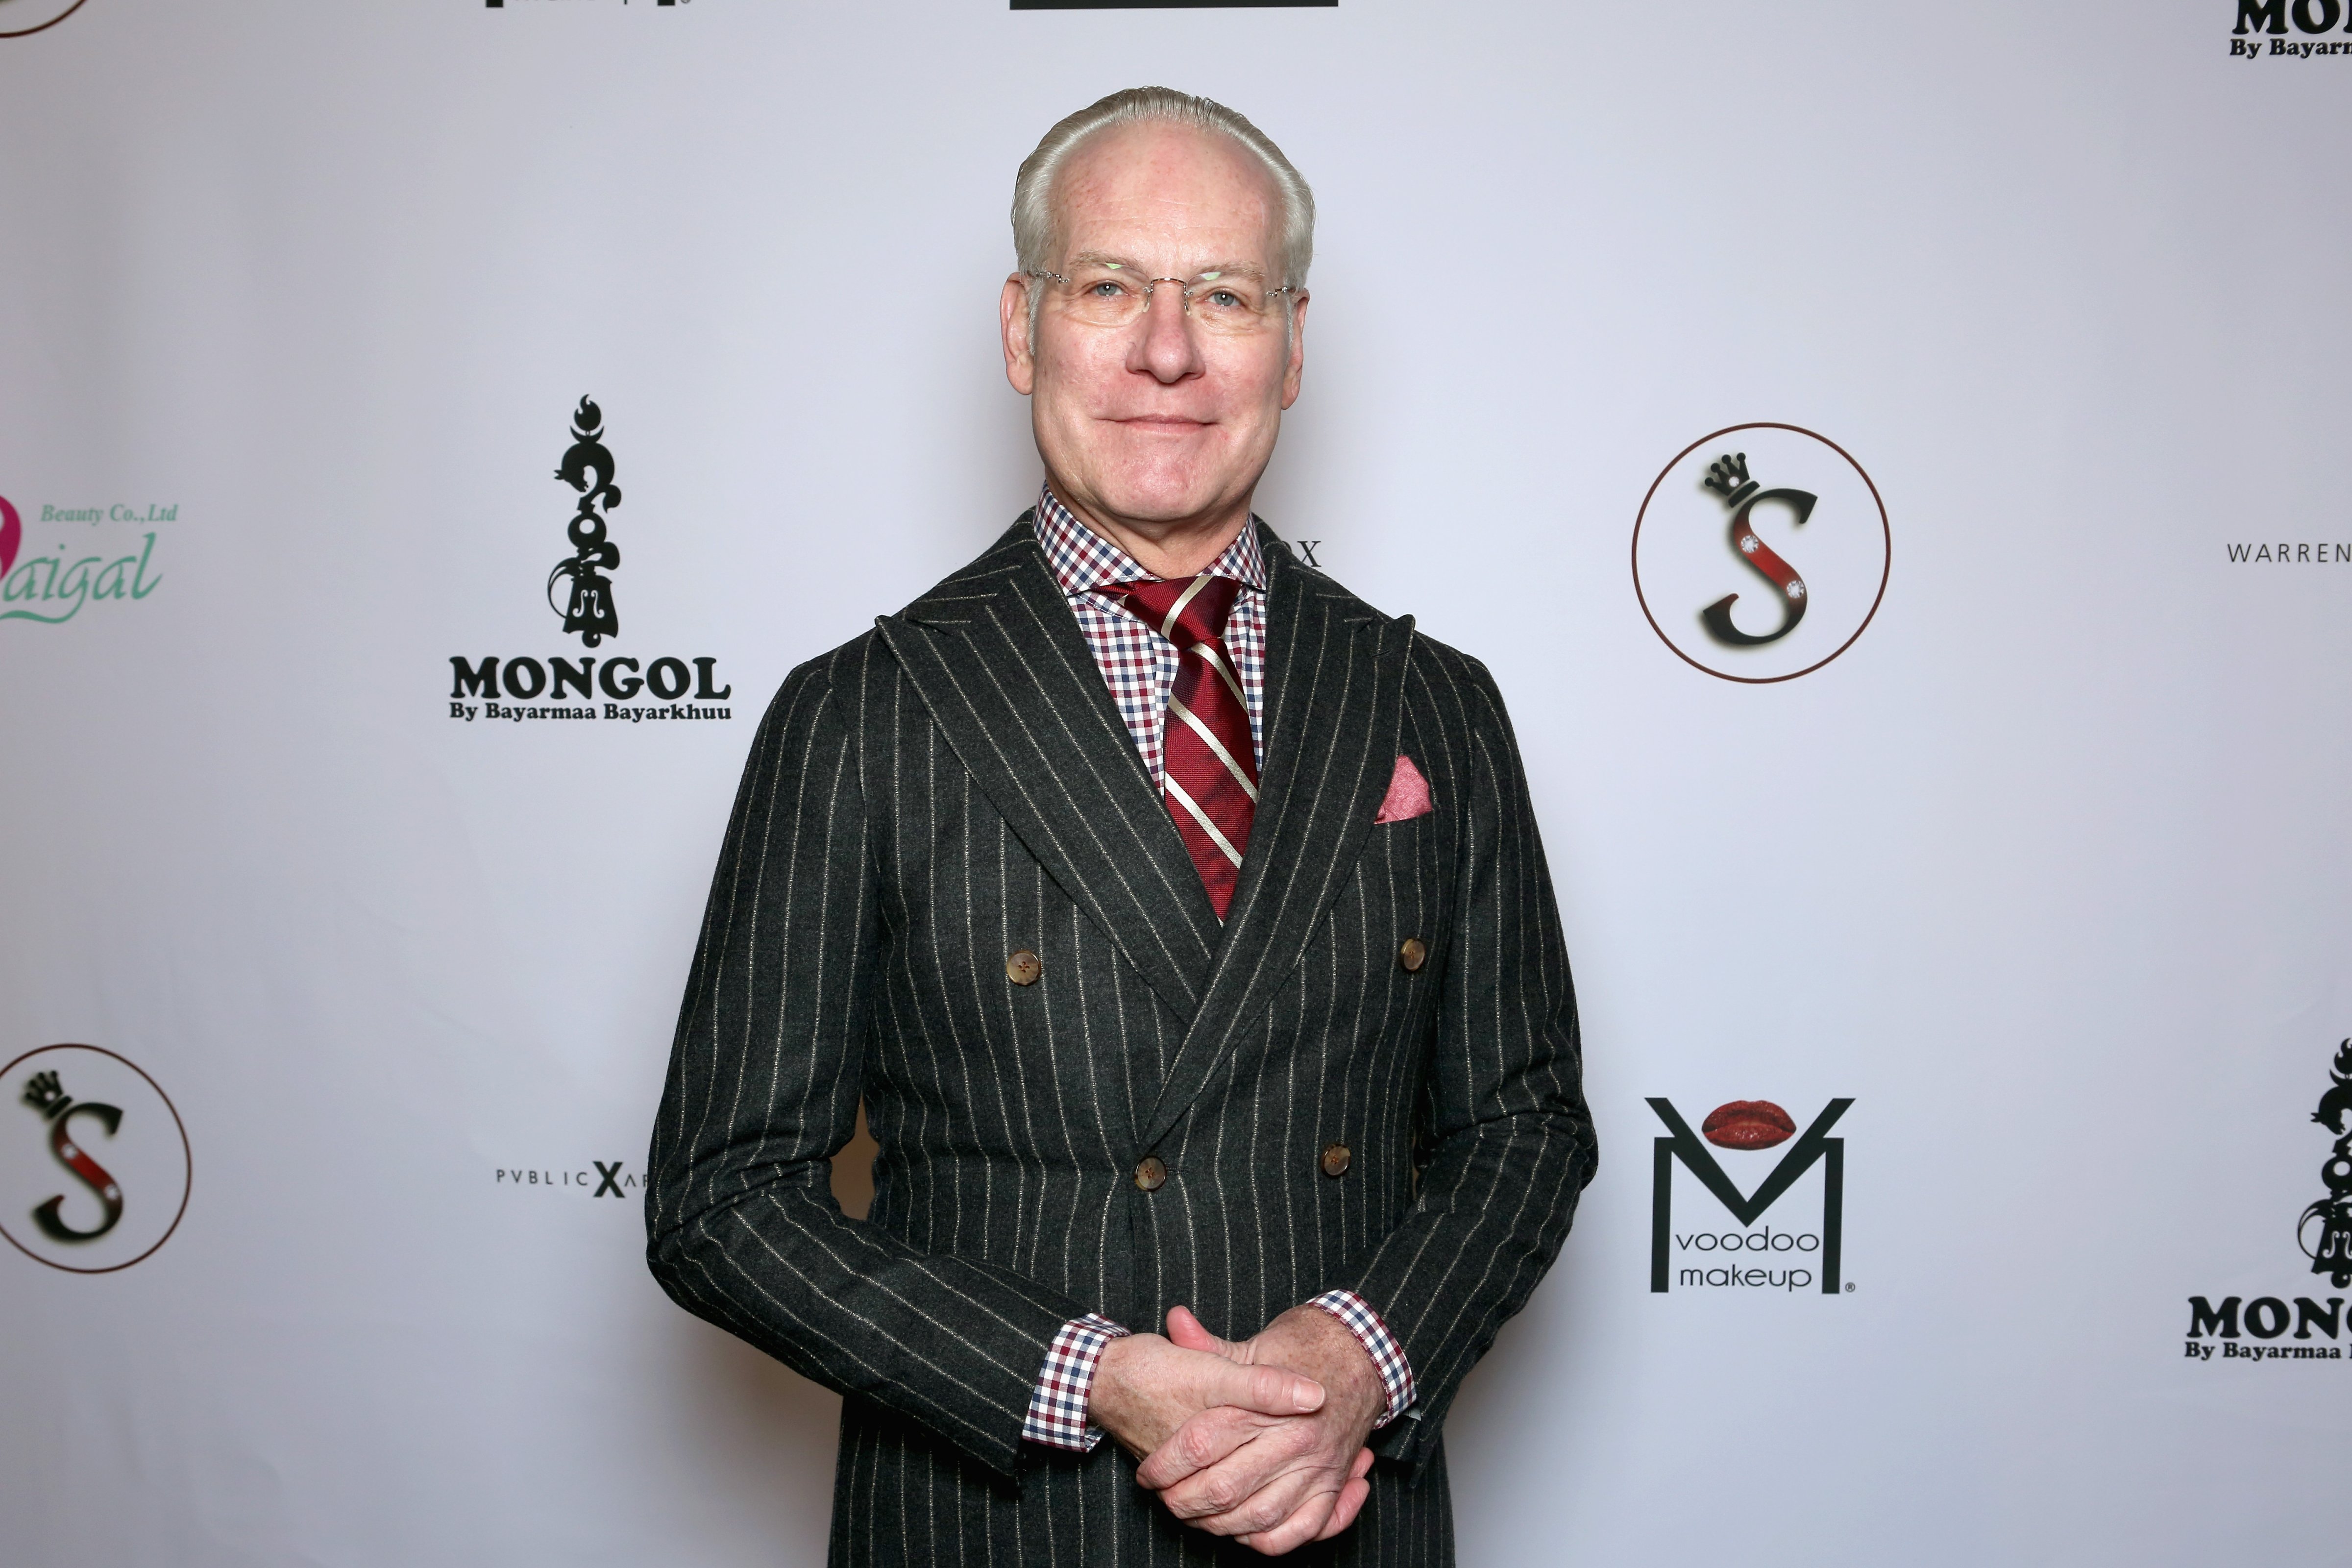 NEW YORK, NY - FEBRUARY 13:  Tim Gunn poses backstage at Mongol fashion show during Mercedes-Benz Fashion Week Fall 2015 at The Theatre at Lincoln Center on February 13, 2015 in New York City.  (Photo by Thomas Concordia/WireImage for Mongol) (Thomas Concordia&mdash;WireImage for Mongol/Getty Images)